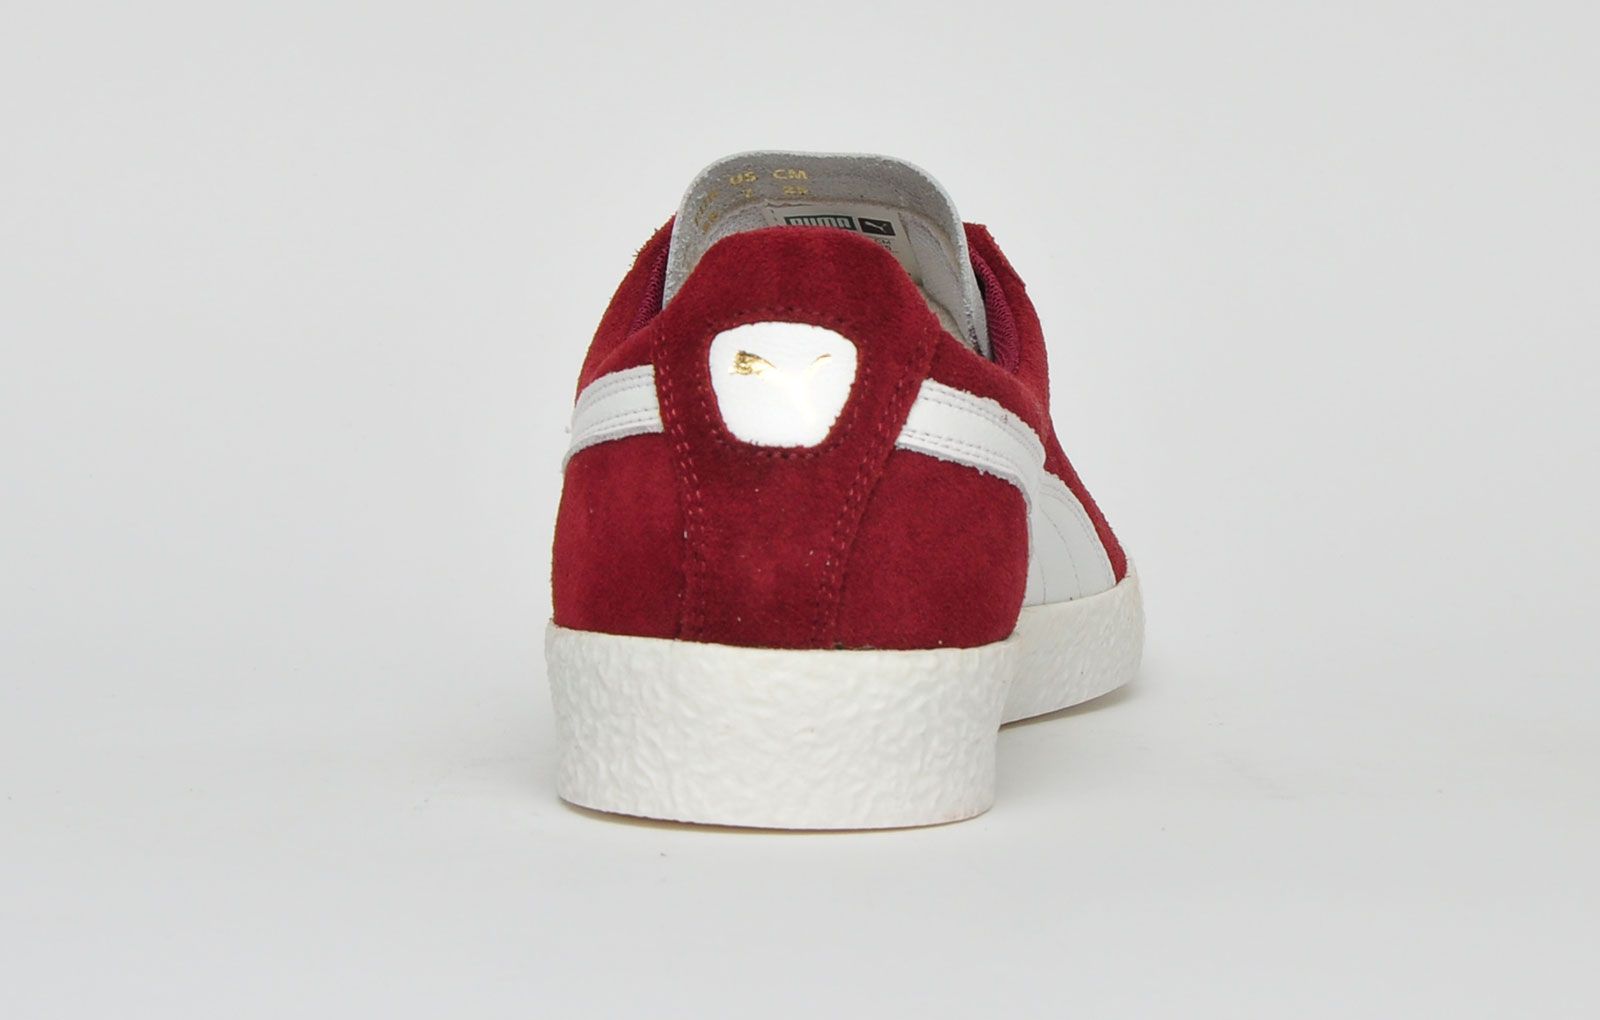 Originally released back in the late 70’s, the Puma Suede Te-Ku named after Teppich and Kunstböden tennis court surface types makes its comeback with a very exclusive UK release. <p>These Puma Suede TE-KU trainers are crafted from premium quality super soft suede with the Puma logo and the 'Puma TE-KU' branding to the side panel in contrasting gold foil finish, sitting on a textured vintage styled rubber outsole for high impact retro street appeal.</p> <p> - Suede leather upper </p> <p>- Secure lace up system</p> <p> - Textured vintage styled midsole </p> <p>- Durable outsole with treaded design for added grip</p> <p> - Puma branding throughout</p>